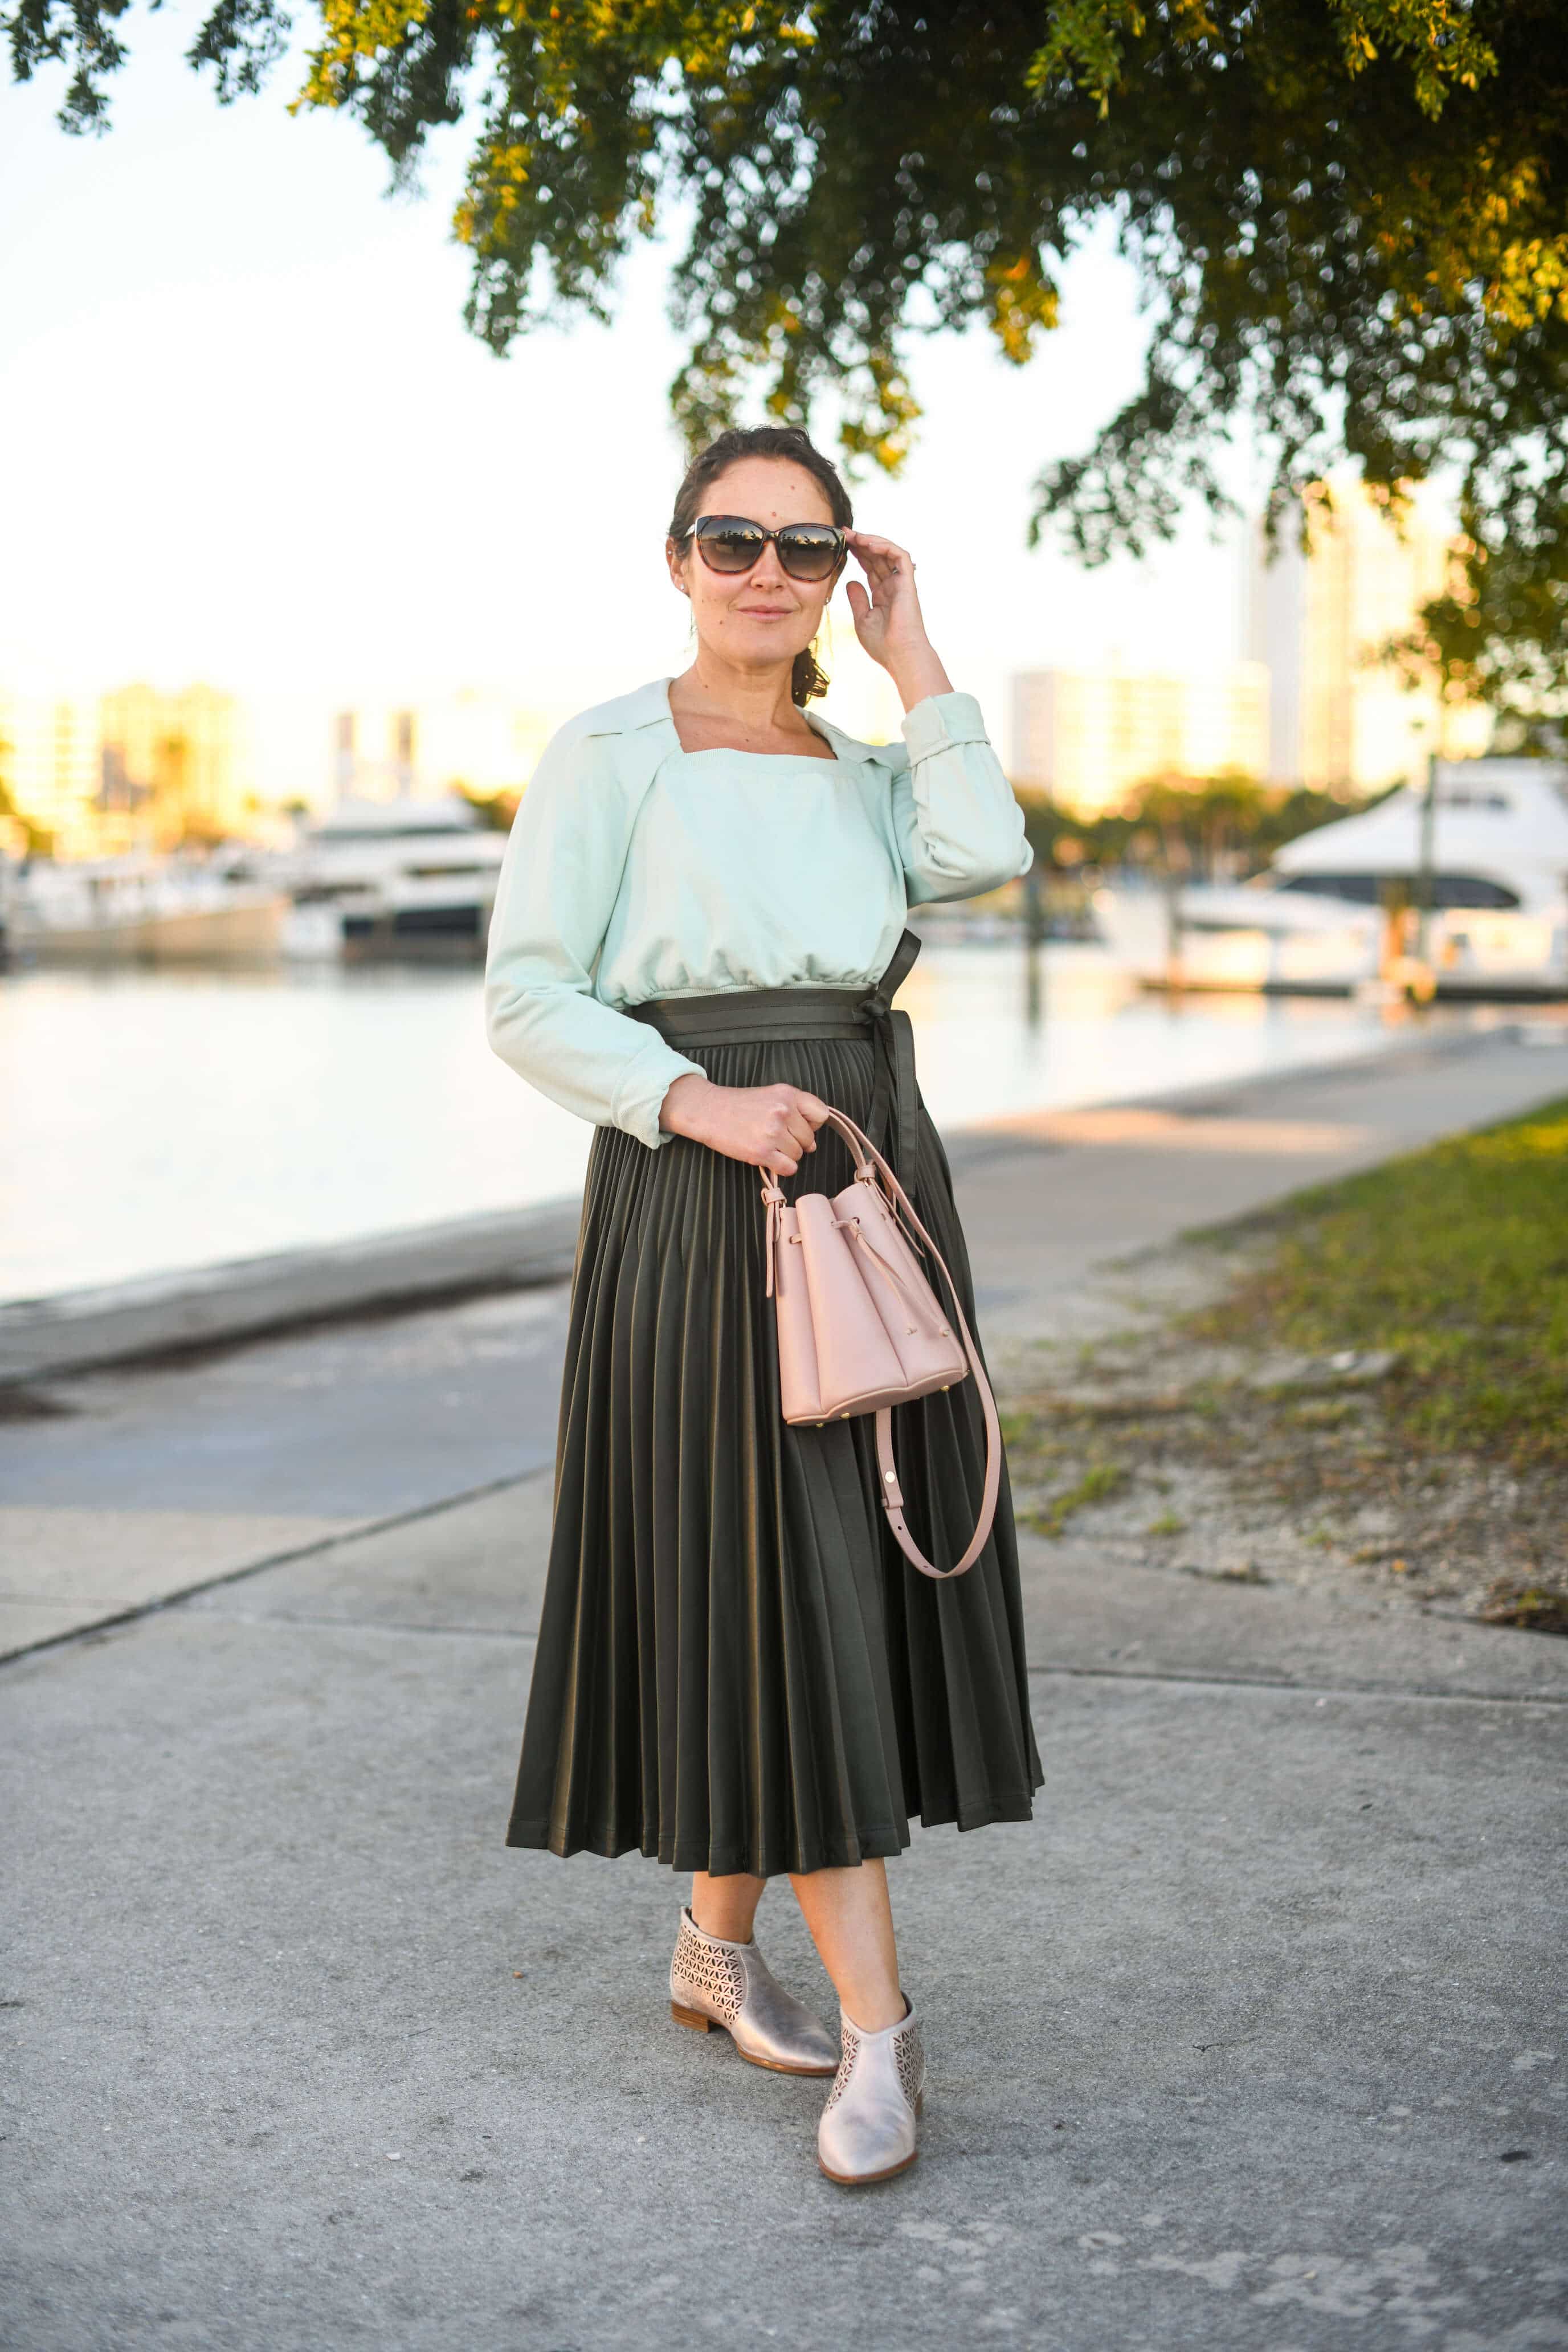 Phillip Lim Skirt and Top Italeau Booties Polene Bag Outfit by Modnitsa Styling